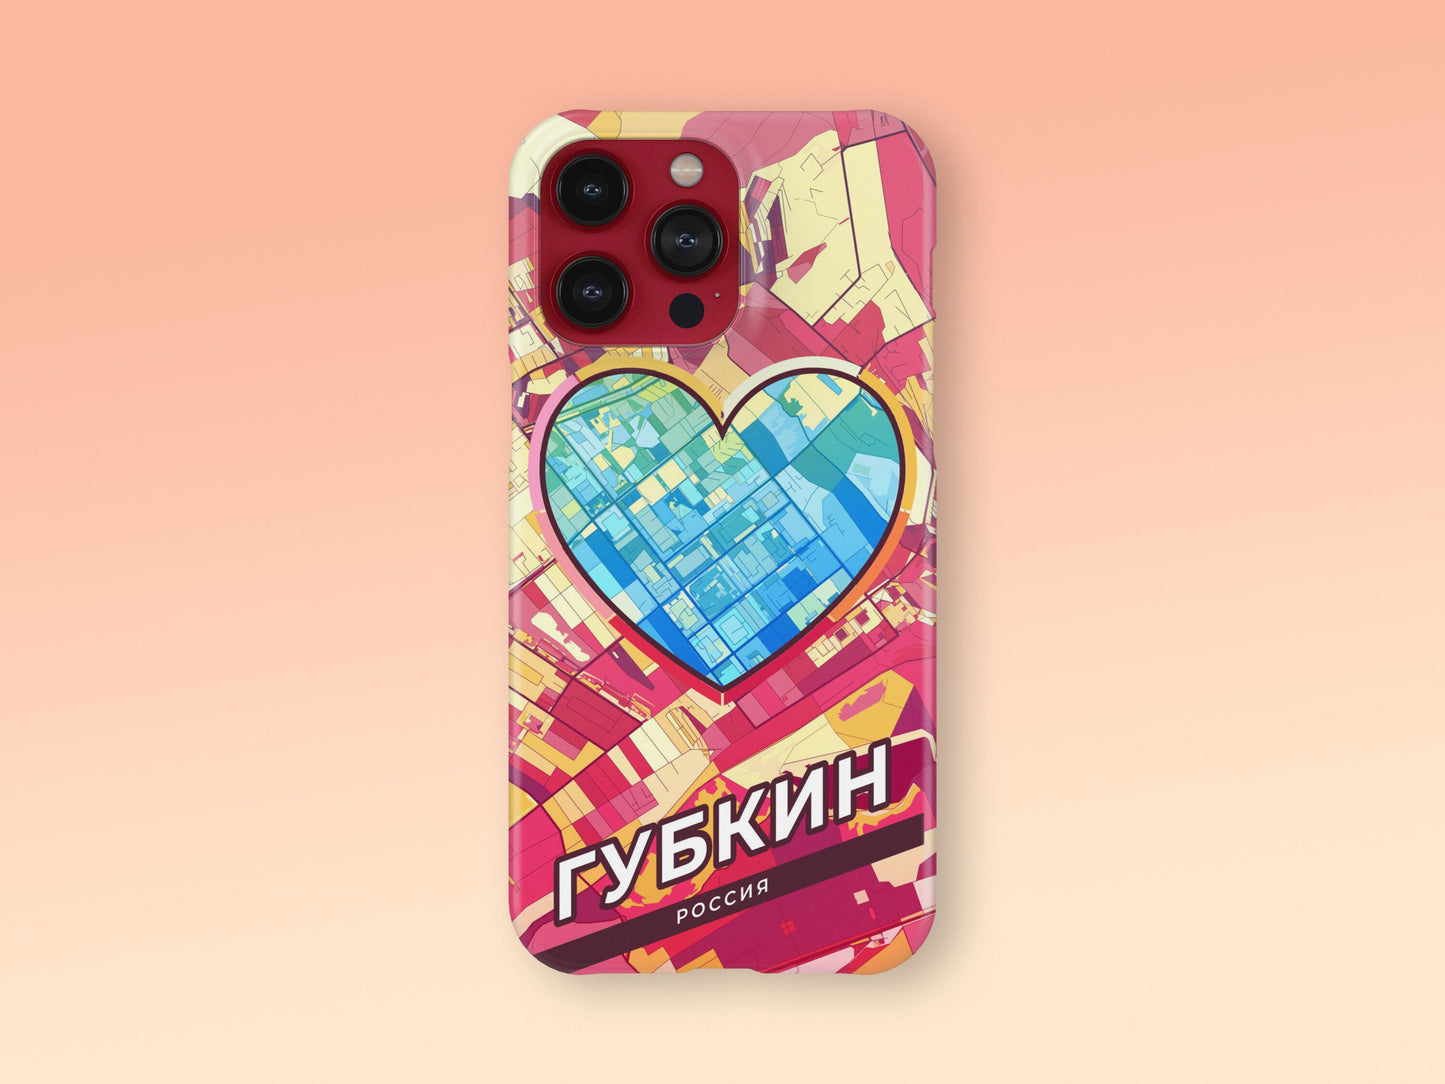 Gubkin Russia slim phone case with colorful icon. Birthday, wedding or housewarming gift. Couple match cases. 2